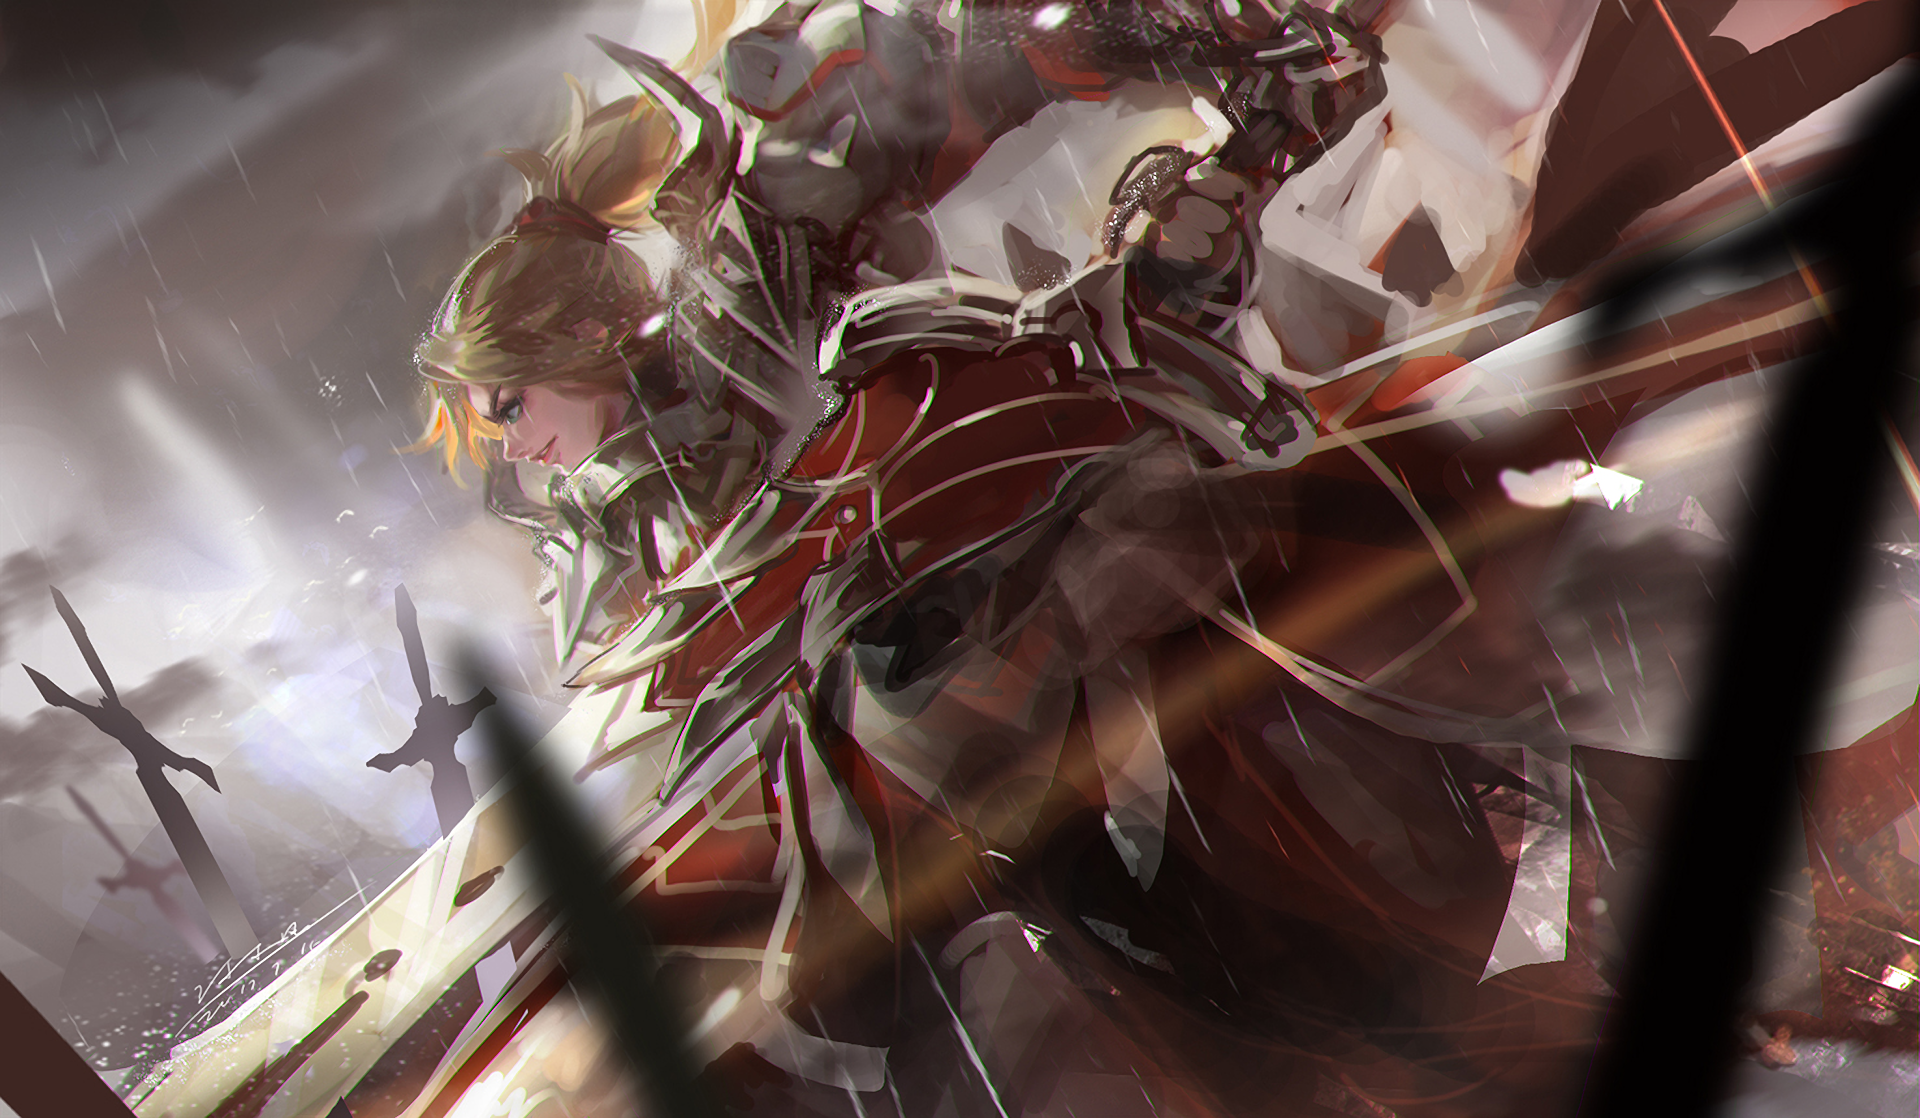 Anime 1920x1118 Fate series Fate/Apocrypha  anime girls Mordred (Fate/Apocrypha) armored woman women with swords 2D female warrior ponytail bangs rain anime fantasy armor sword overcast dutch tilt Fate/Grand Order fan art side view blue eyes smiling parted lips looking away blonde